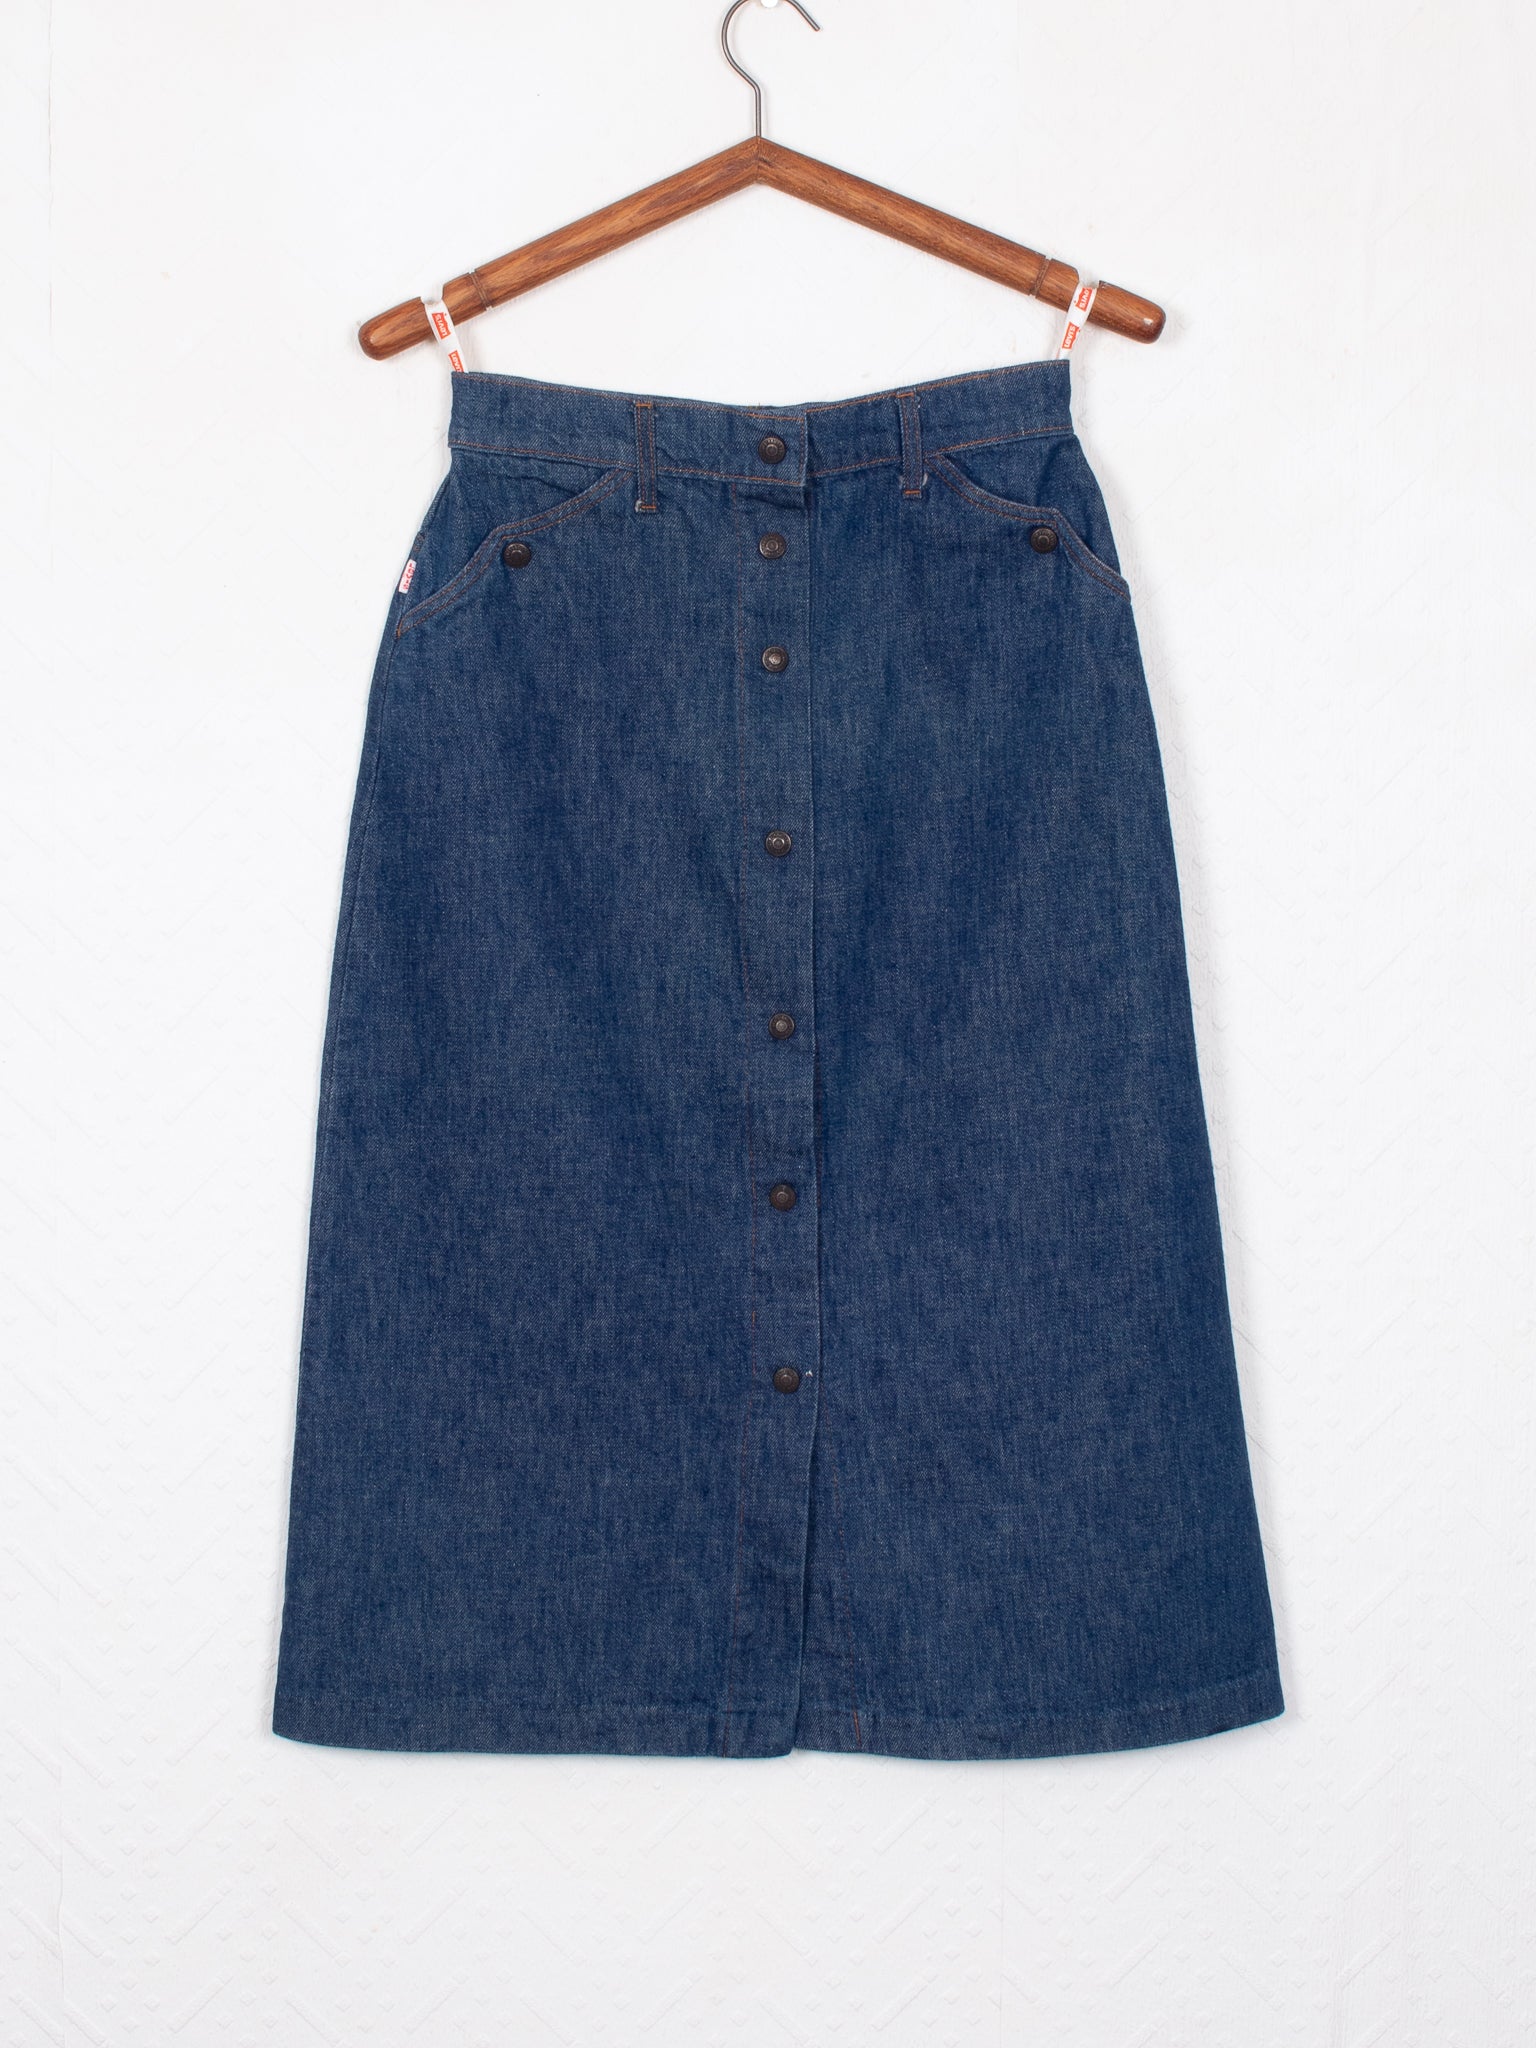 skirts shorts & dresses 70s Levi's Button-Up A-Line Skirt - W28